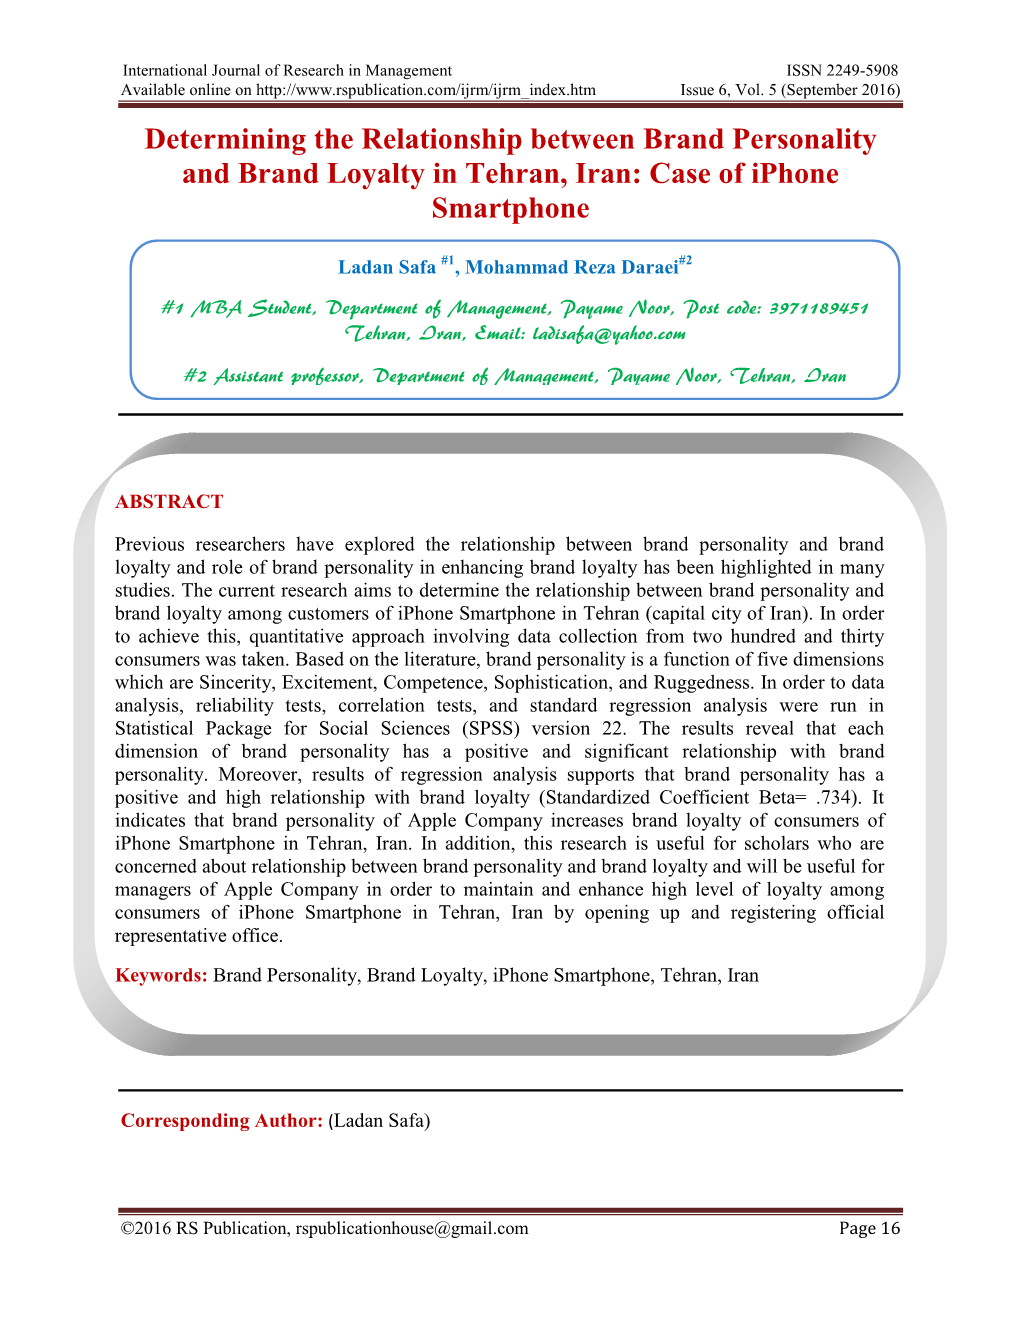 Determining the Relationship Between Brand Personality and Brand Loyalty in Tehran, Iran: Case of Iphone Smartphone